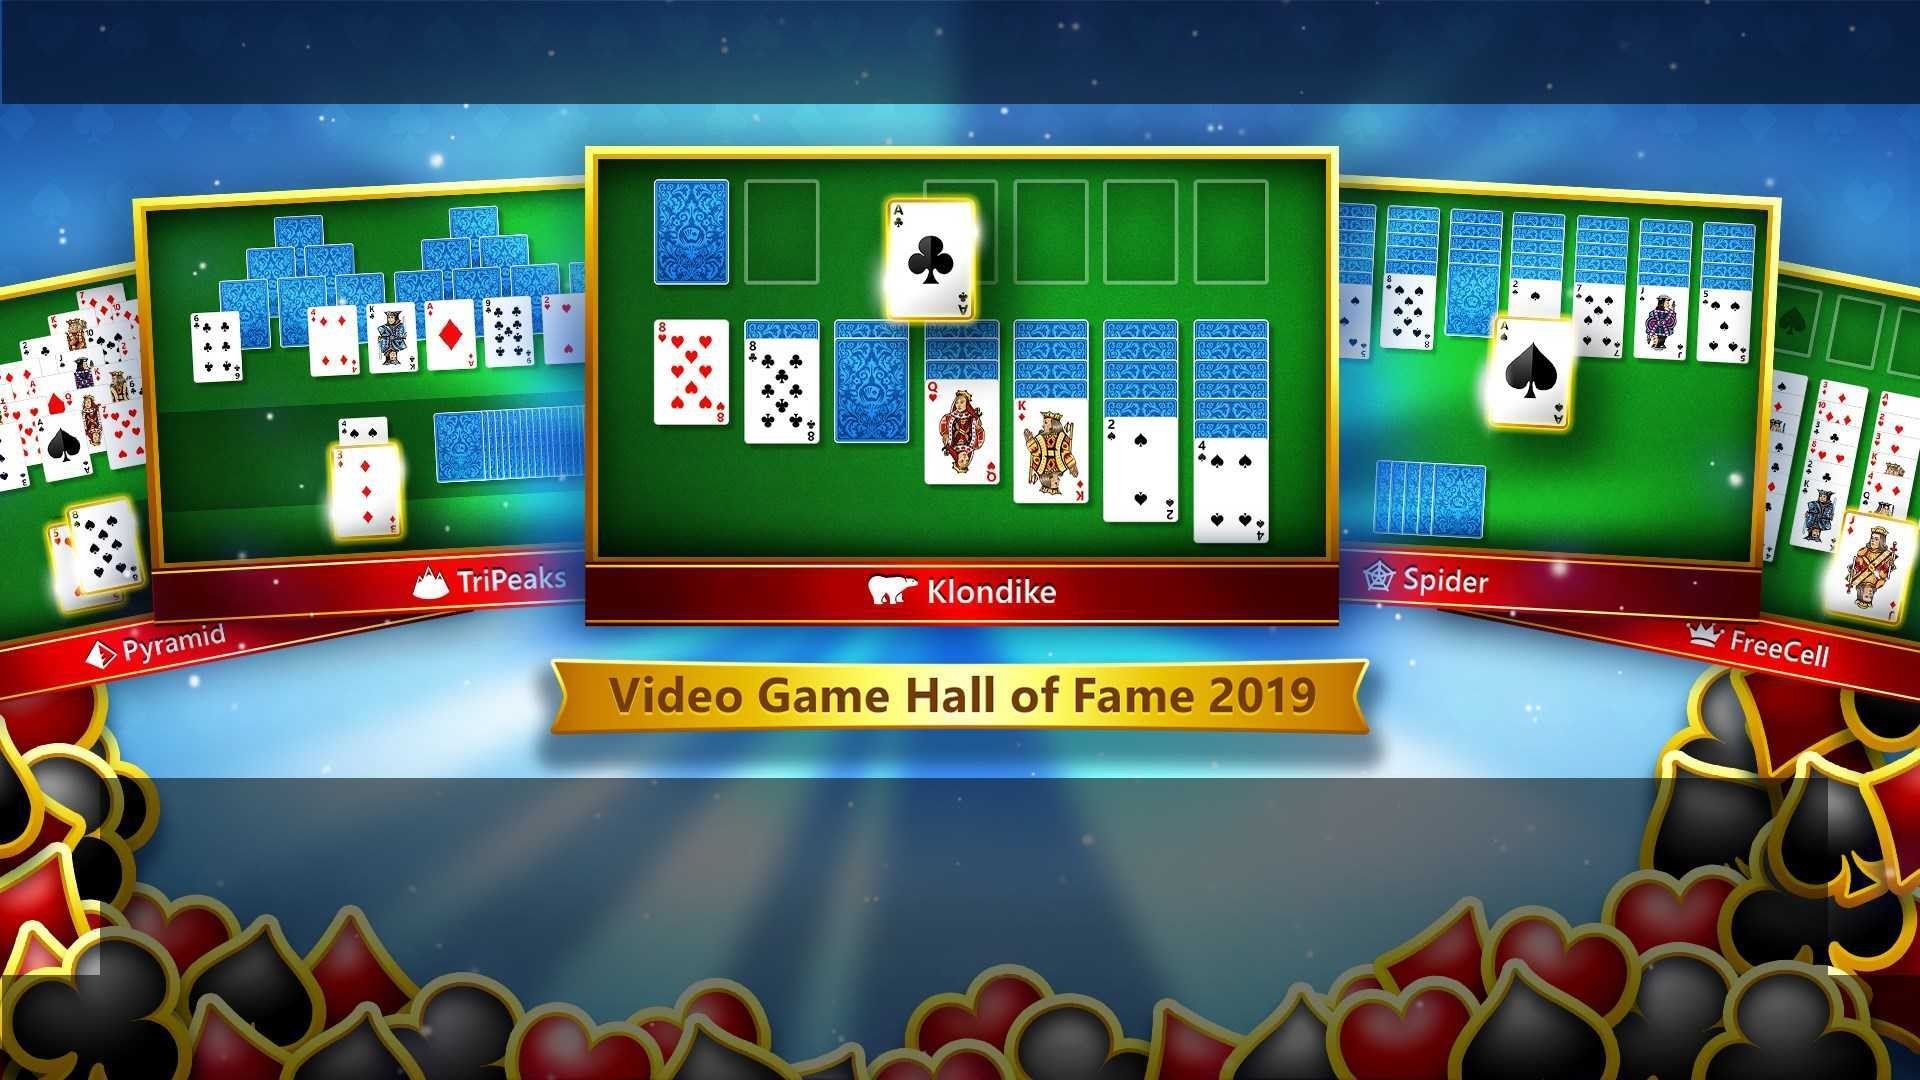 microsoft solitaire collection windows 10 won